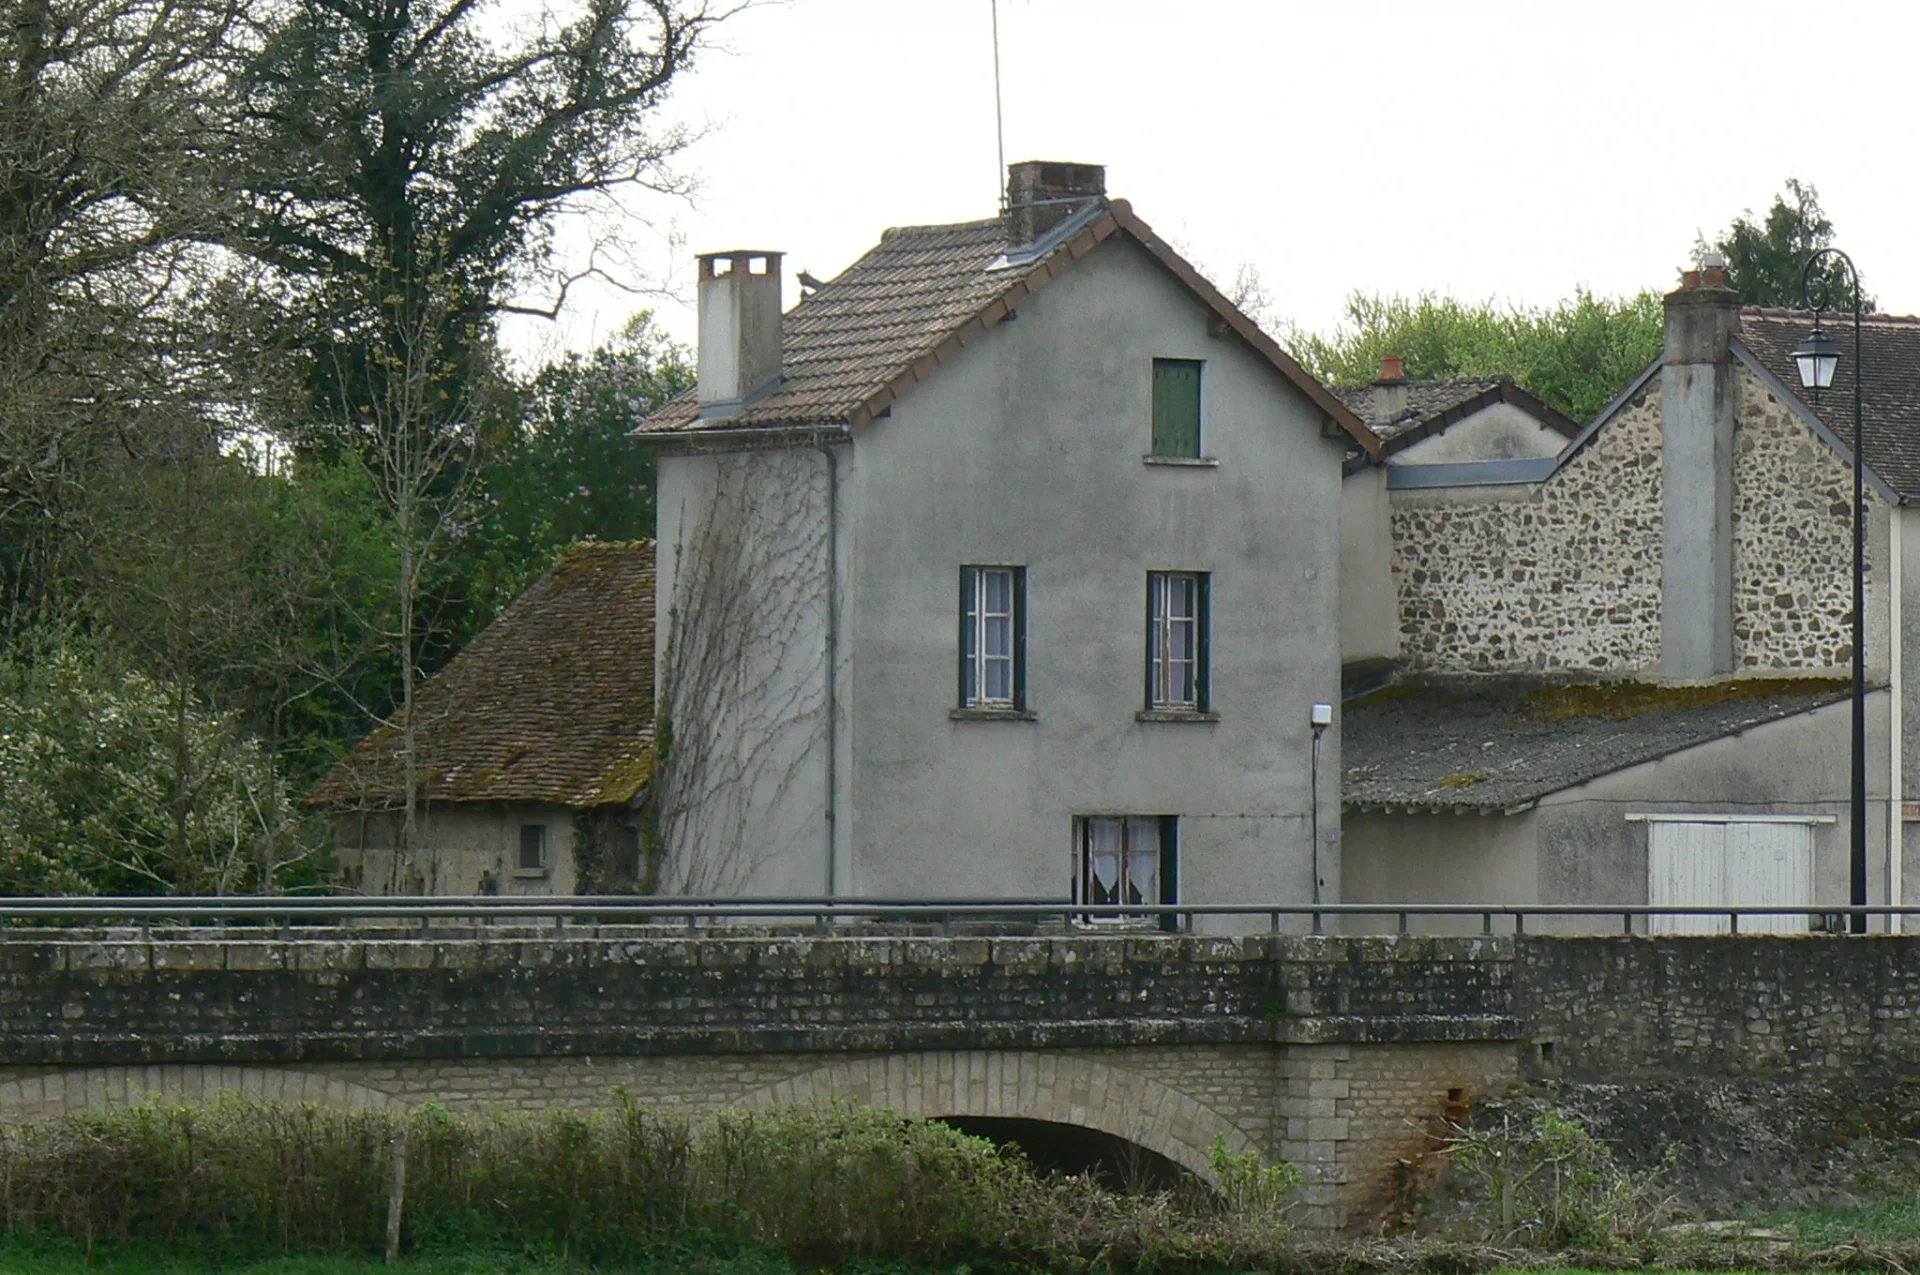 Riverside house on outskirts of popular town